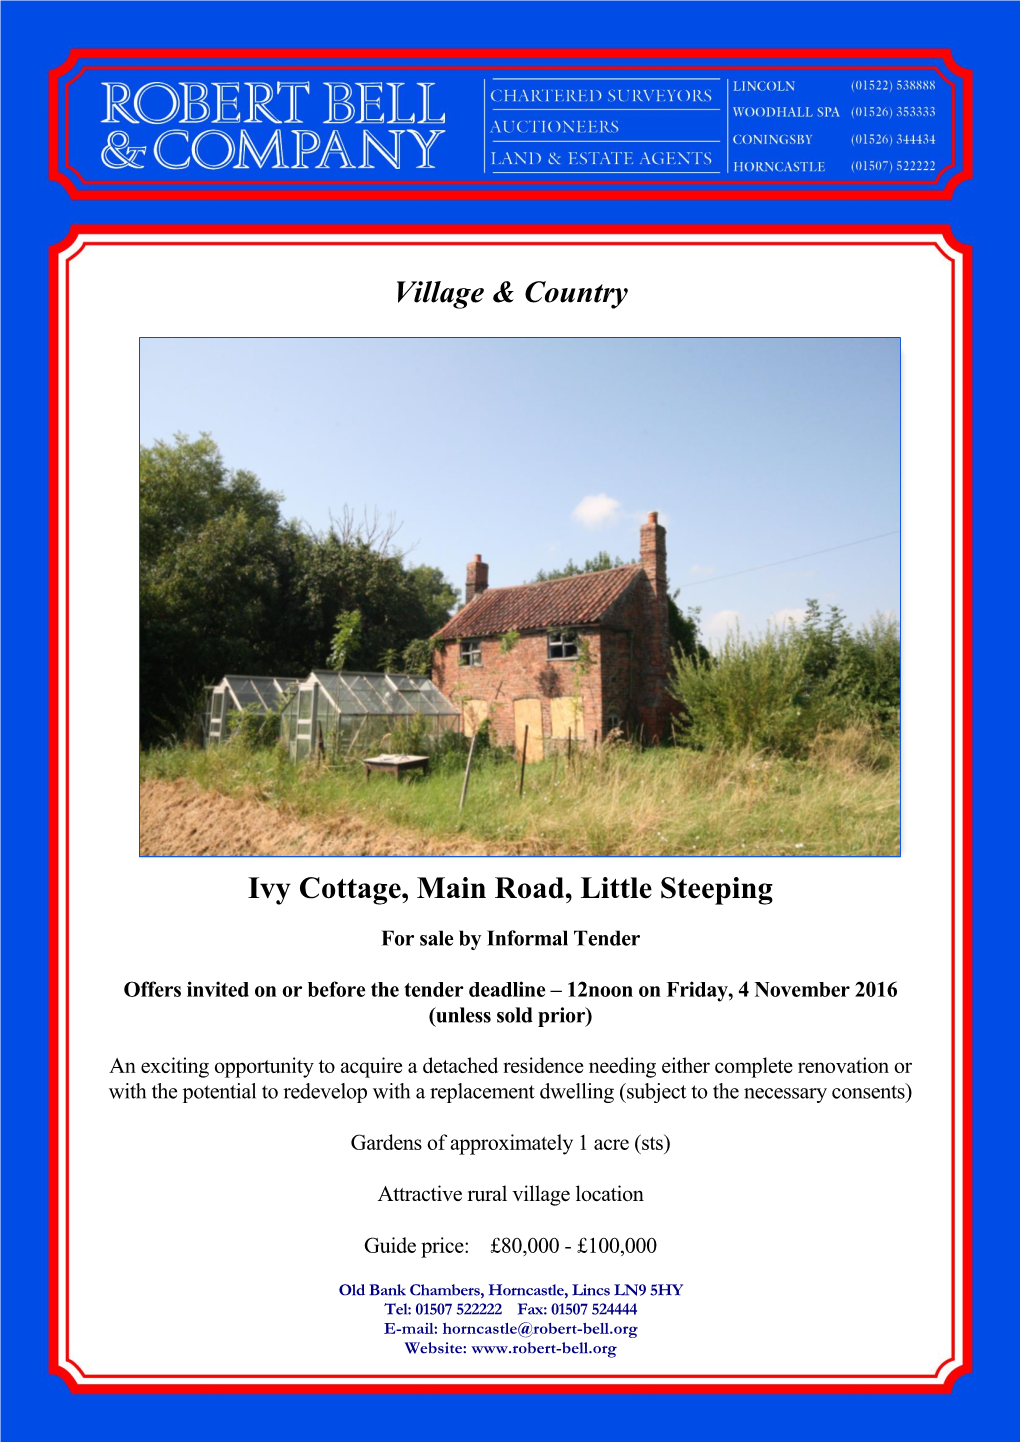 Village & Country Ivy Cottage, Main Road, Little Steeping